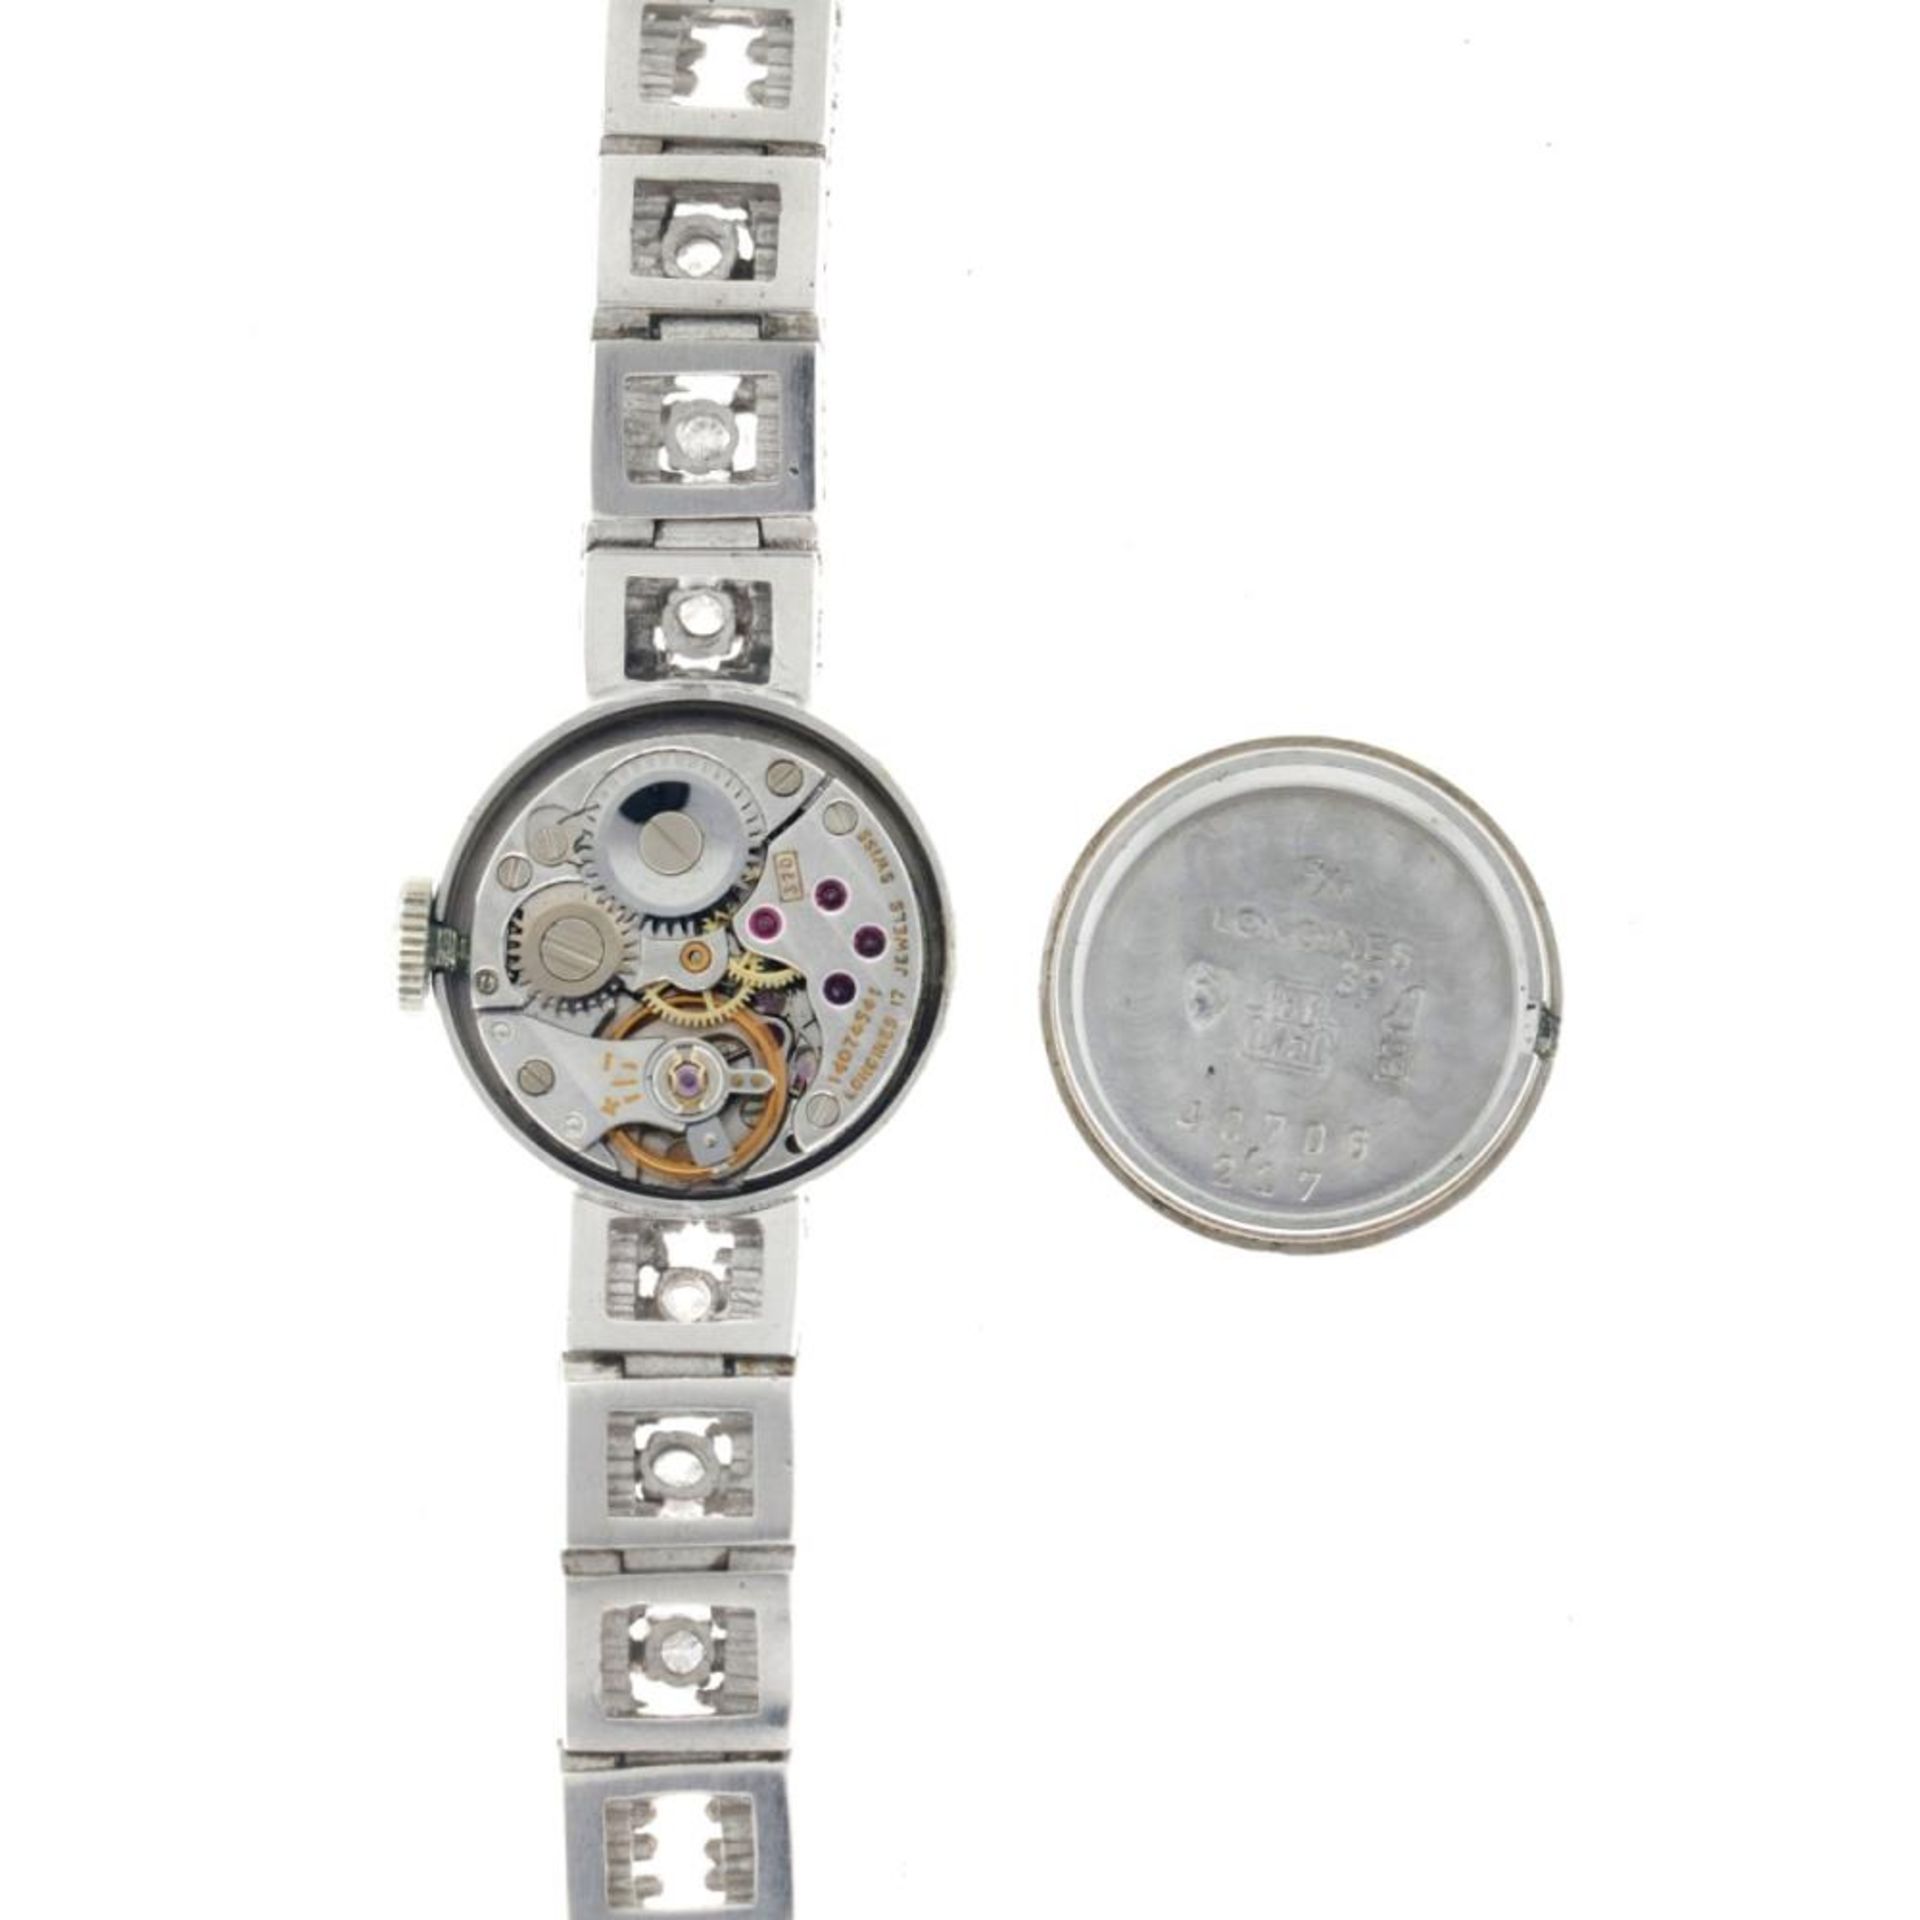 Longines - Ladies watch - approx. 1960. - Image 12 of 12